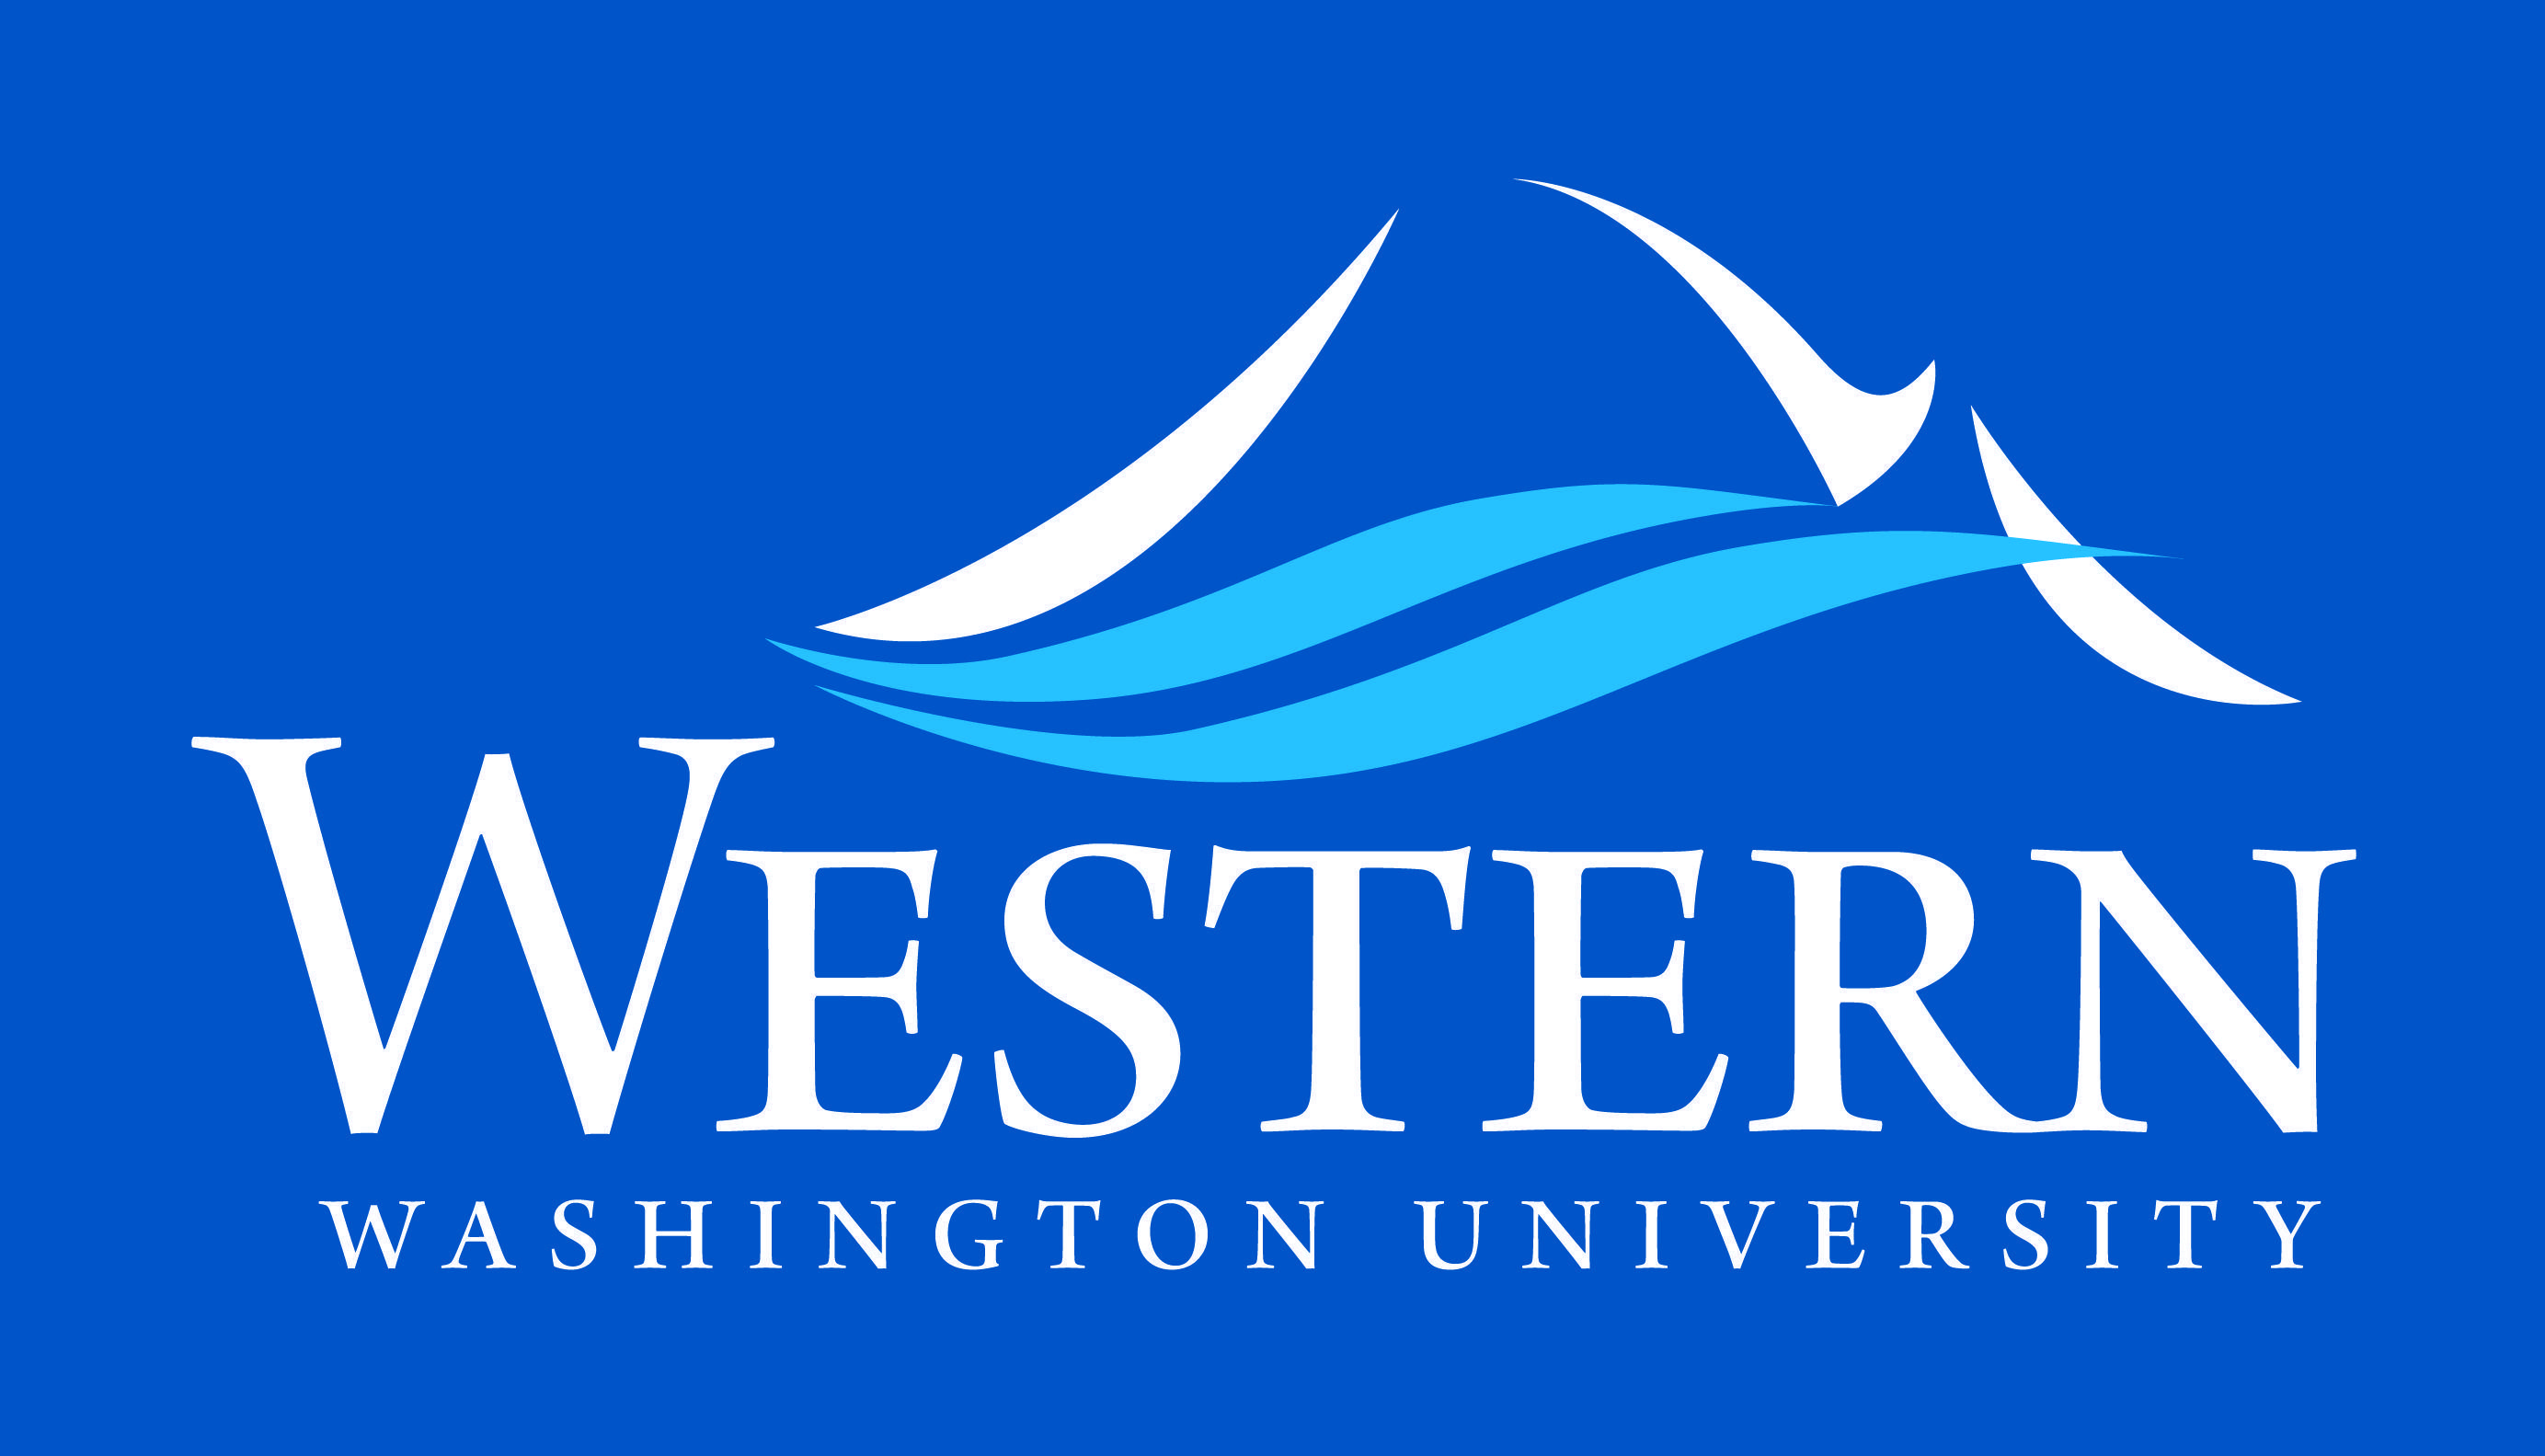 WWU Logo - Logos for Papers & Posters | College of Science & Engineering